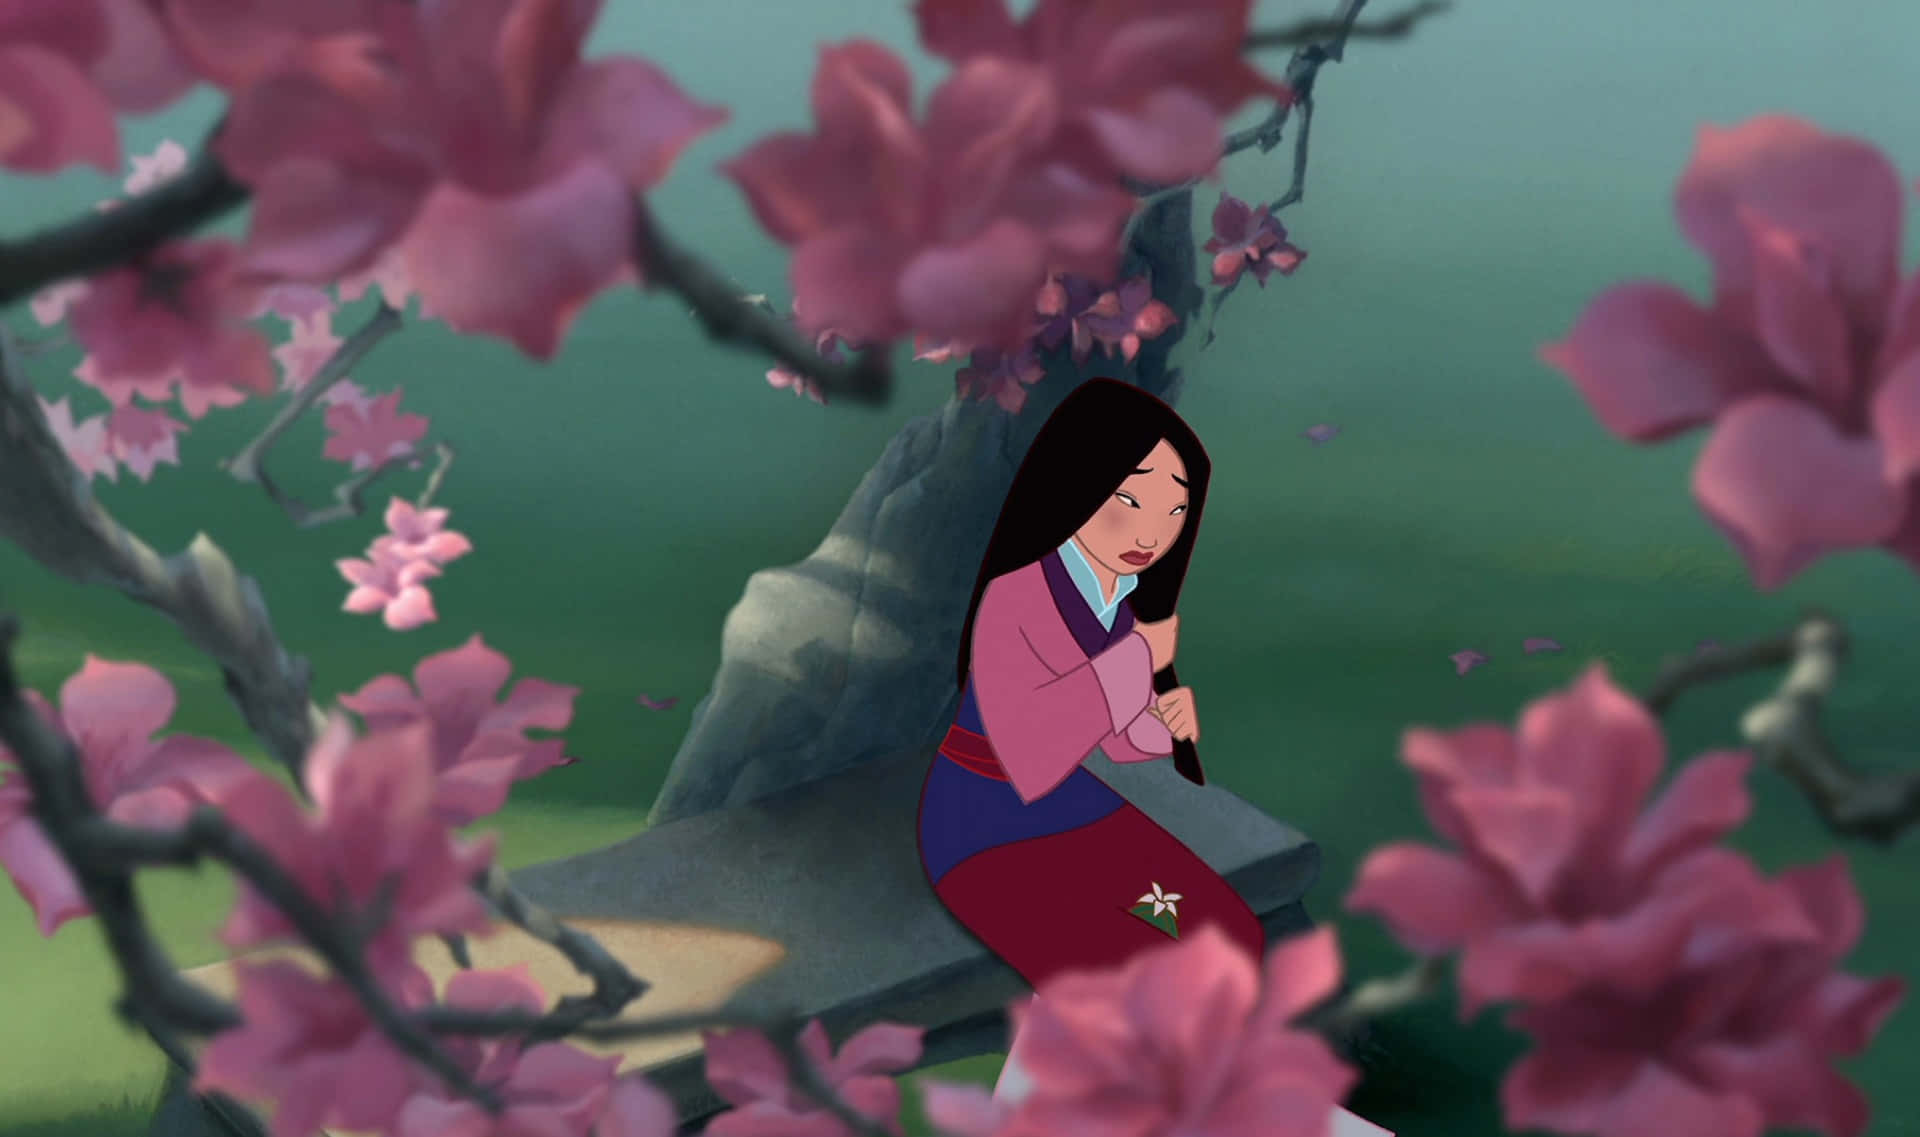 Mulan In The Forest With Pink Flowers